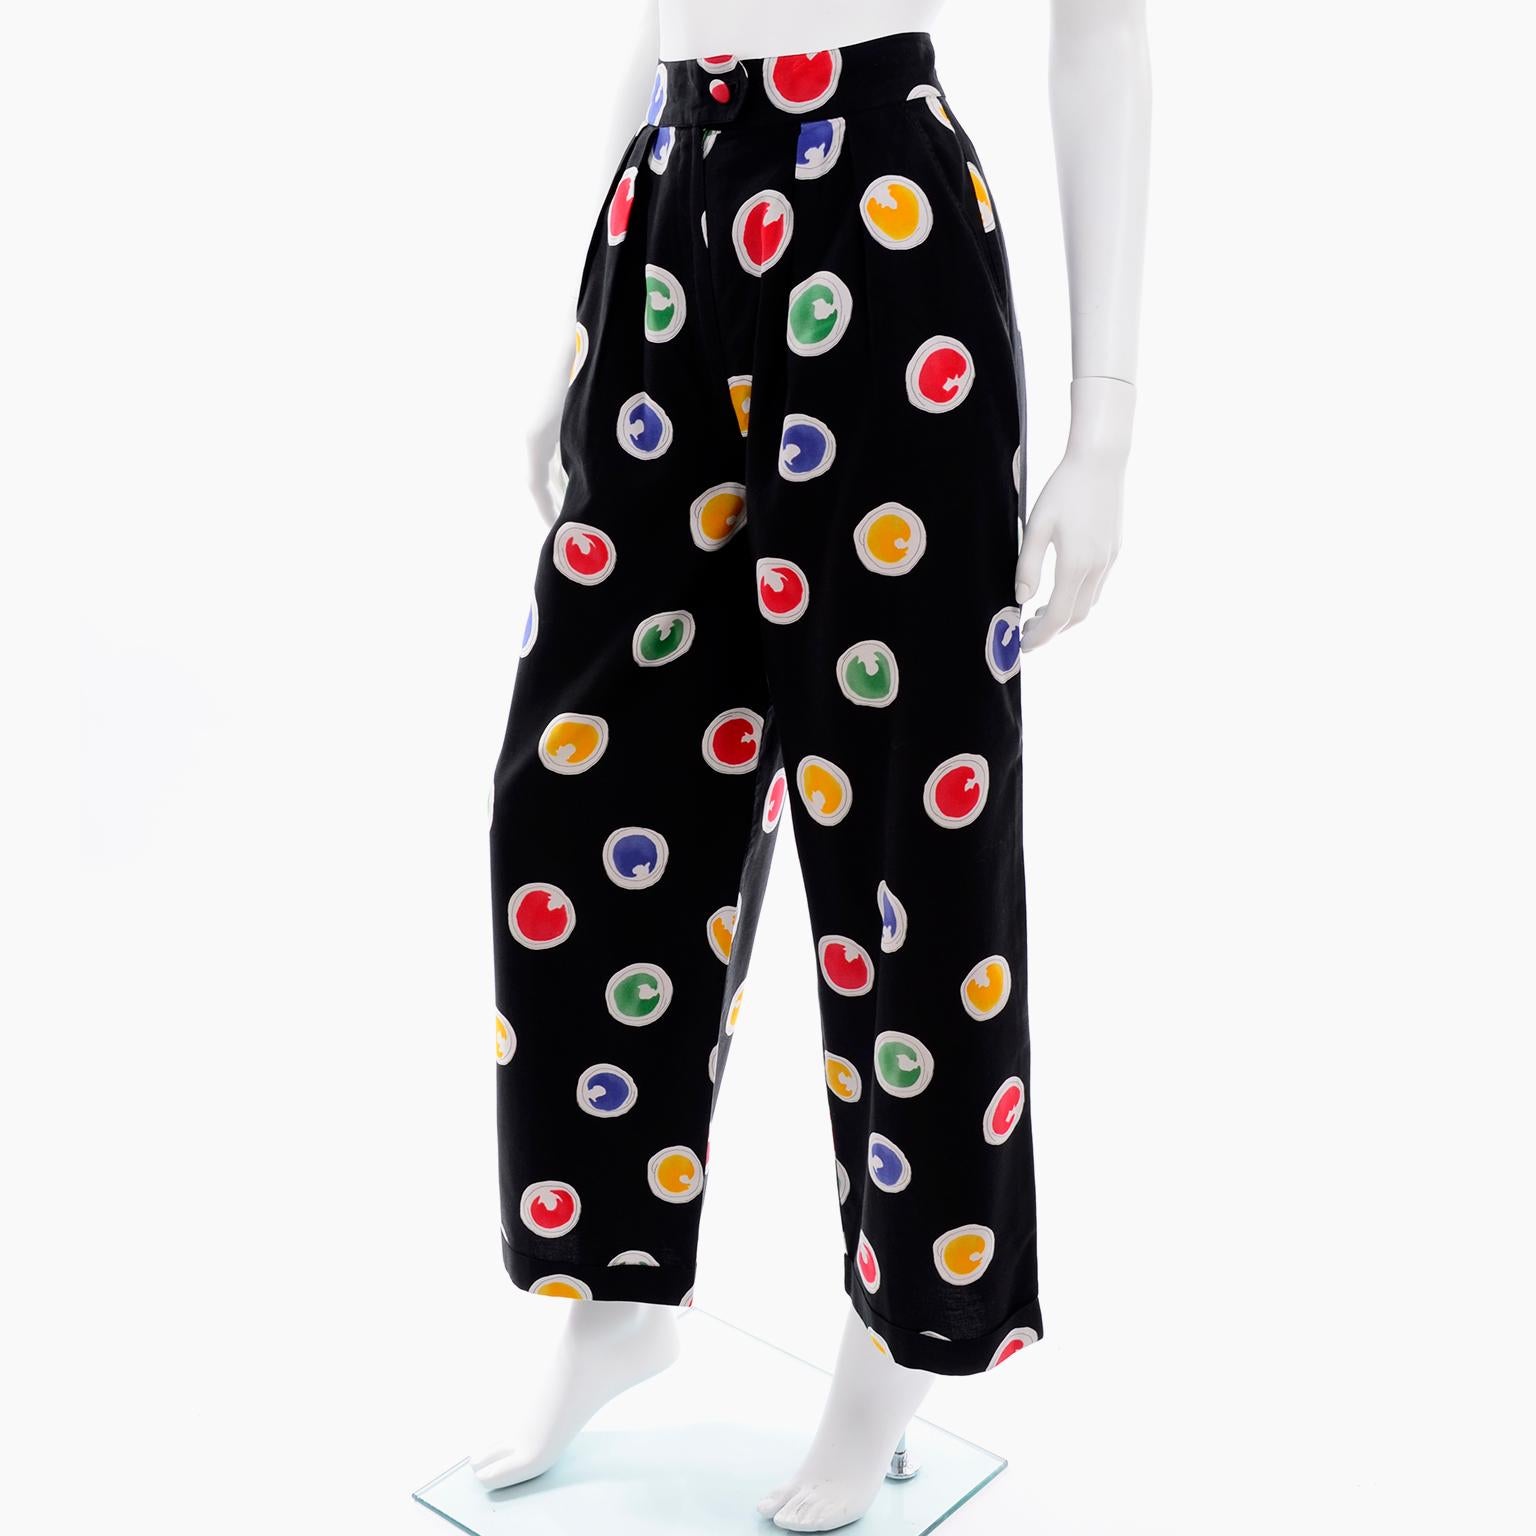 These vintage black cotton high waisted pants were designed by Patrick Kelly in the 1980's. We love Patrick Kelly and treasure his designs whenever we are fortunate enough to find them. These trousers are in a circles print that is meant to resemble